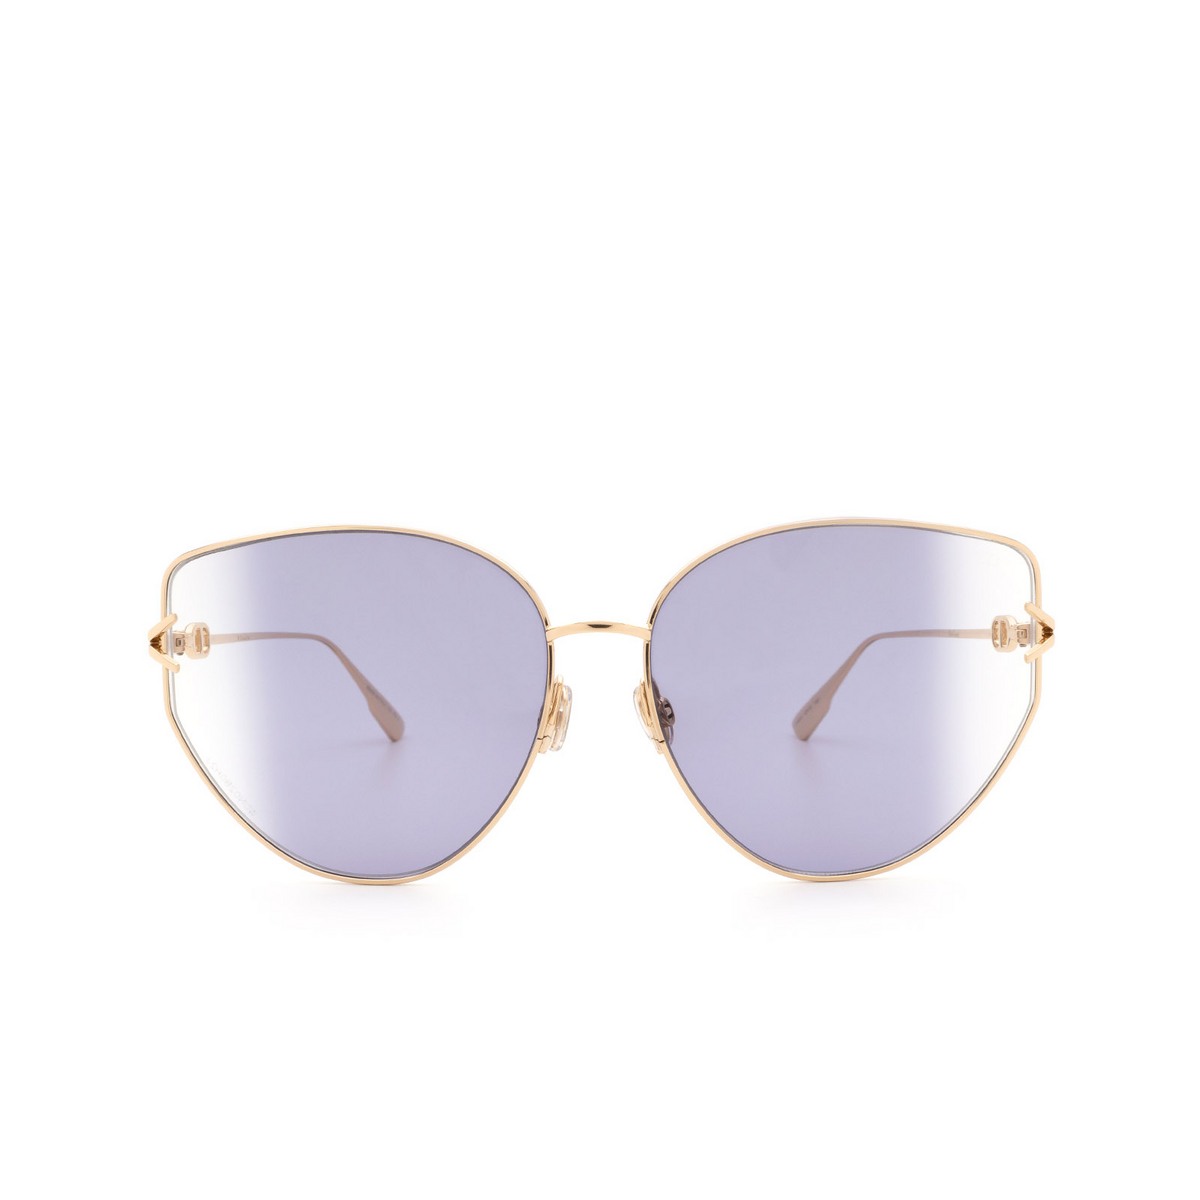 Dior® Butterfly Sunglasses: DIORGIPSY1 color Rose Gold 000/SO - front view.